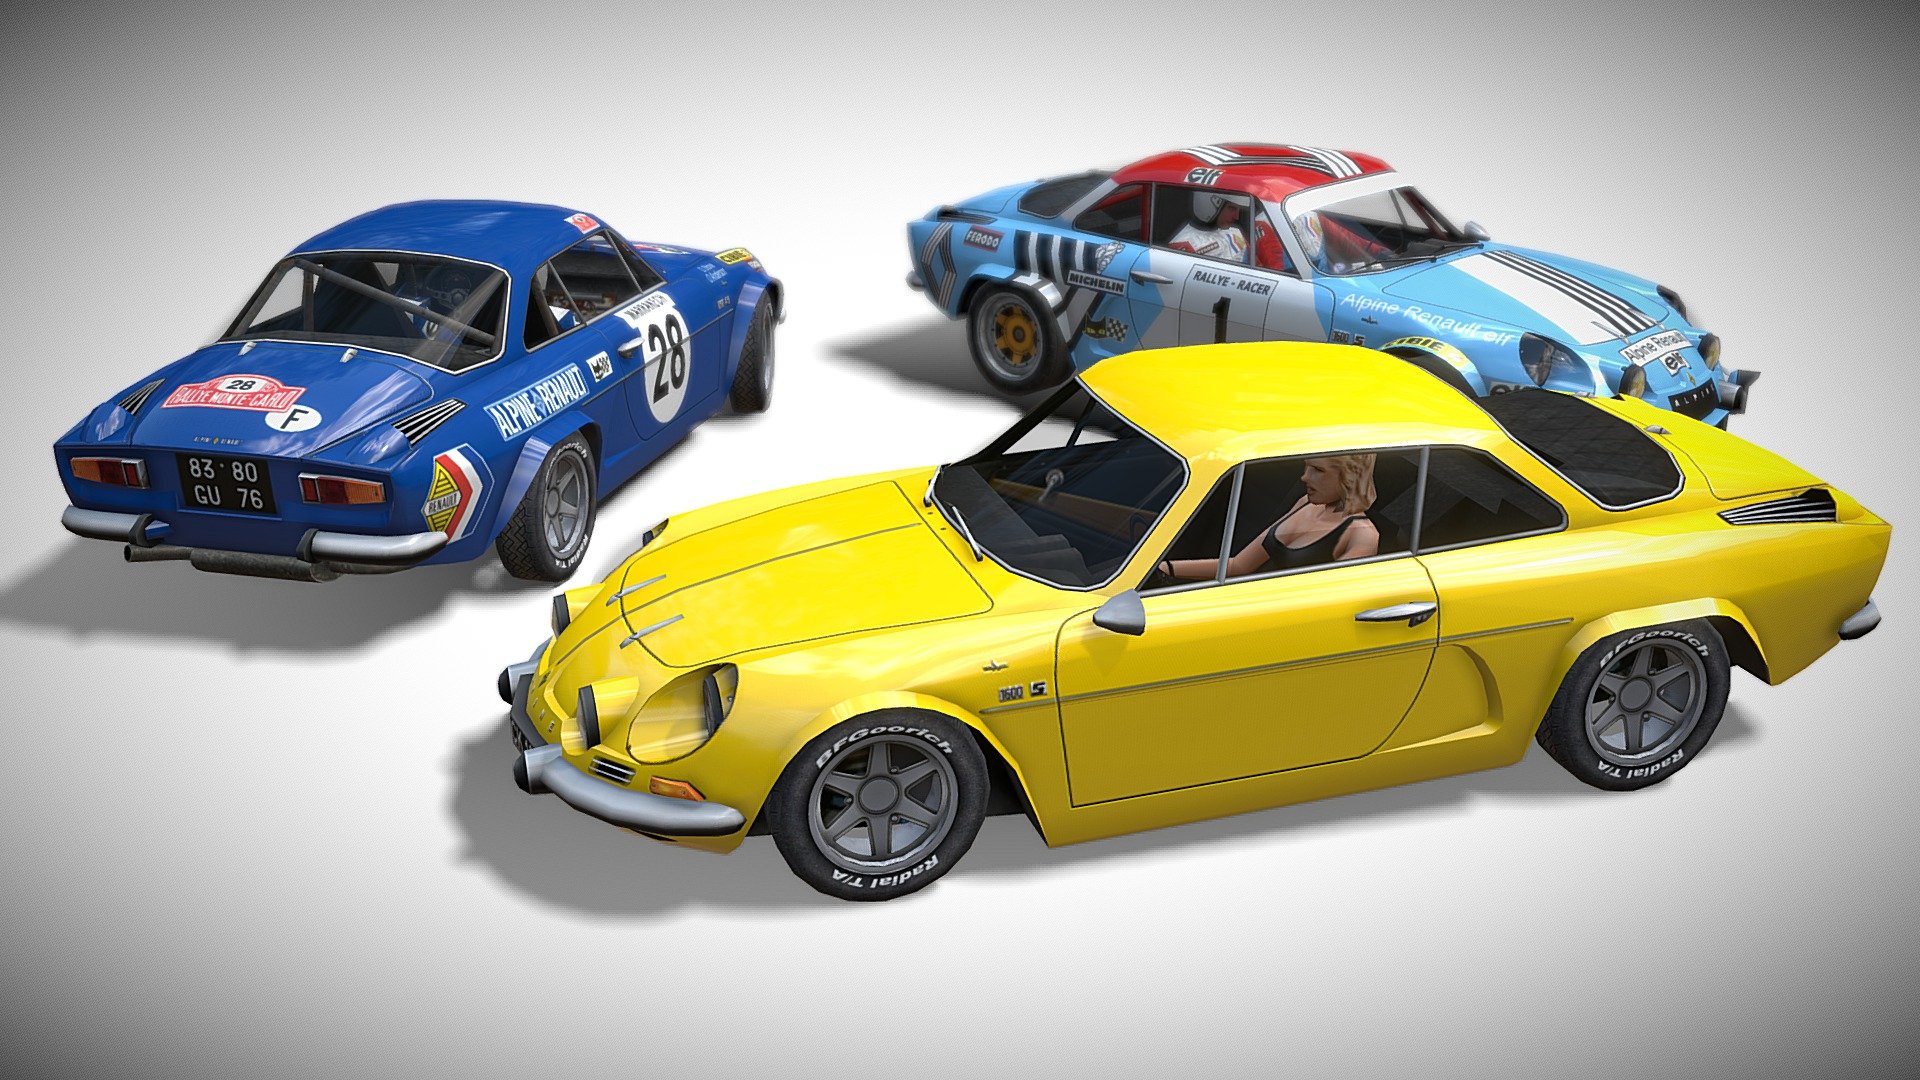 This is one of my first car models I built for a free independant racing game that allowed user generated content (racer.nl).  It had a wonderful community that i do miss quite a bit.  This was created before normal maps, high poly counts, and Substance Painter, but at least we had Photoshop&hellip;

The Renault Alpine A110 is one of my favorite vintage automobiles of all time.  I have only seen this car once in the flesh, and hope to again some day, it's so beautiful to me.  I have debated rebuilding this model as a high poly asset many times so I dug it out to see how it holds up in Sketchfab all these years later.  See what you think and maybe download it for fun.  Unfortunately I seem to have lost all the source PSD files for the textures and offer no tech support on the model (it is nearly 20 years old after all).

a110 Rally01 (#1): 5327 tris
a110 Rally02 (#28): 5293 tris
a110 Street (yellow): 4930 tris

I hope you enjoy the early 2000's retro video game model experience 3d model